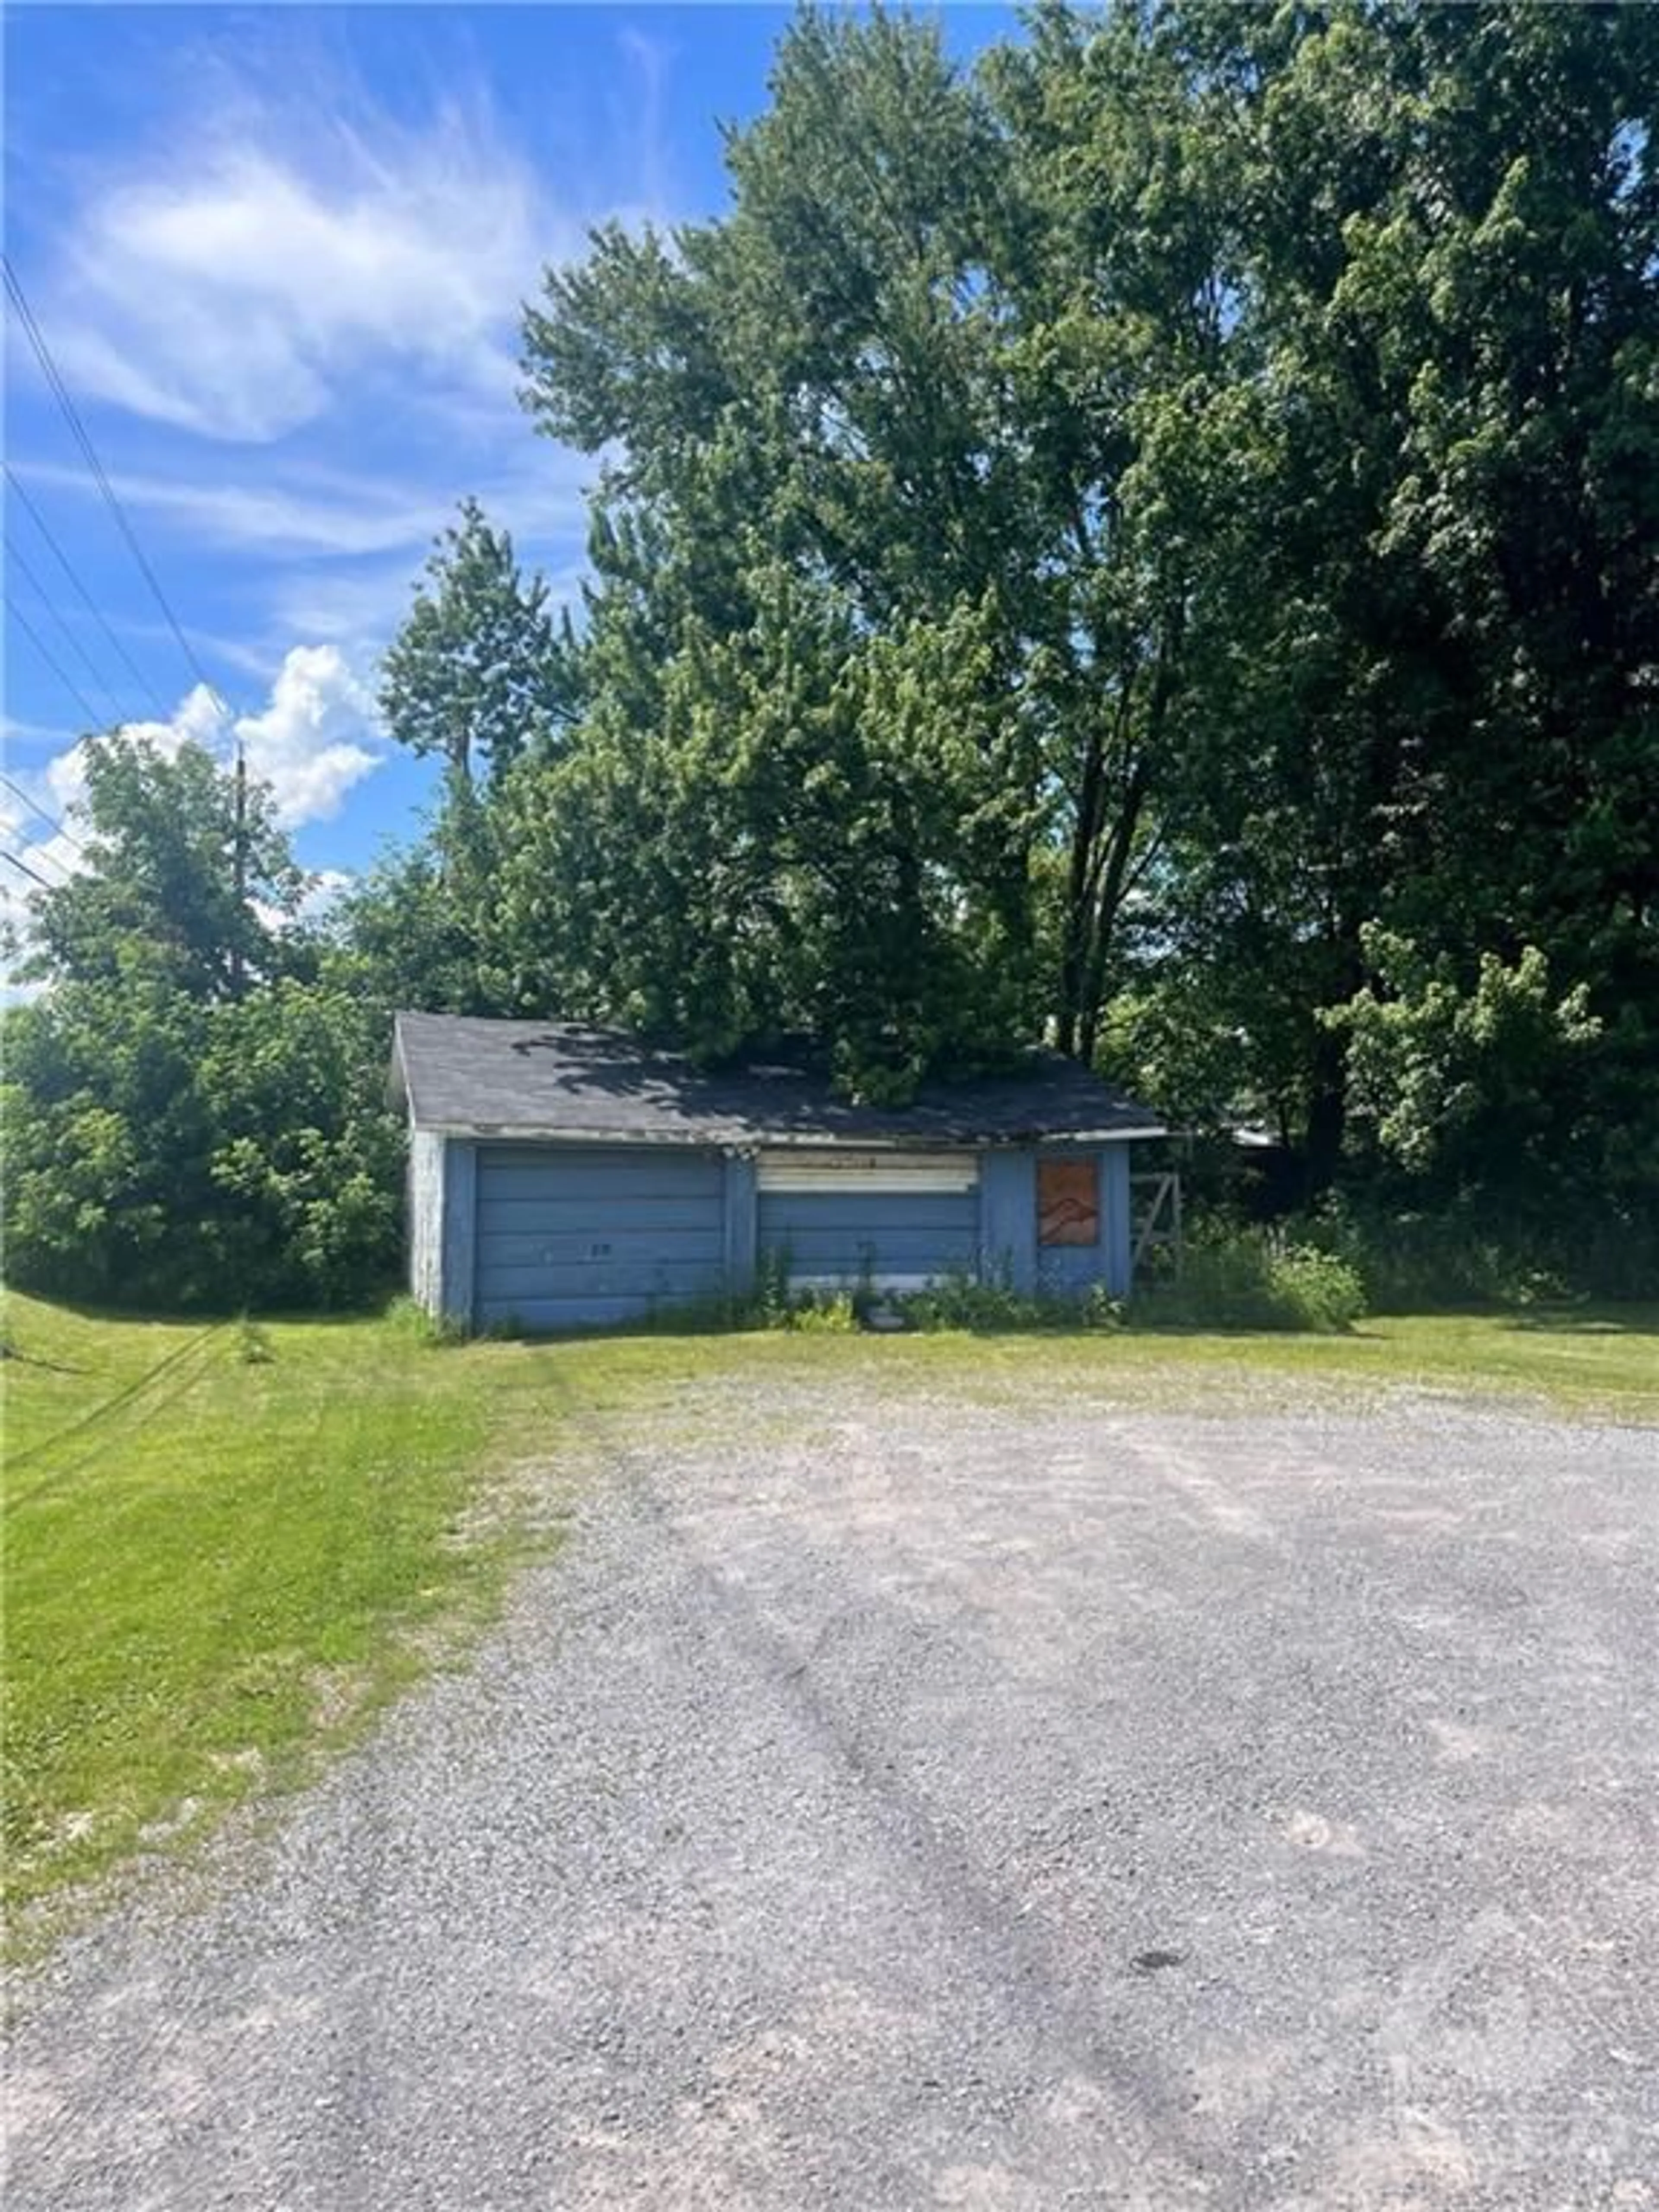 Shed for 3433 CARLING Ave, Ottawa Ontario K2H 7V5